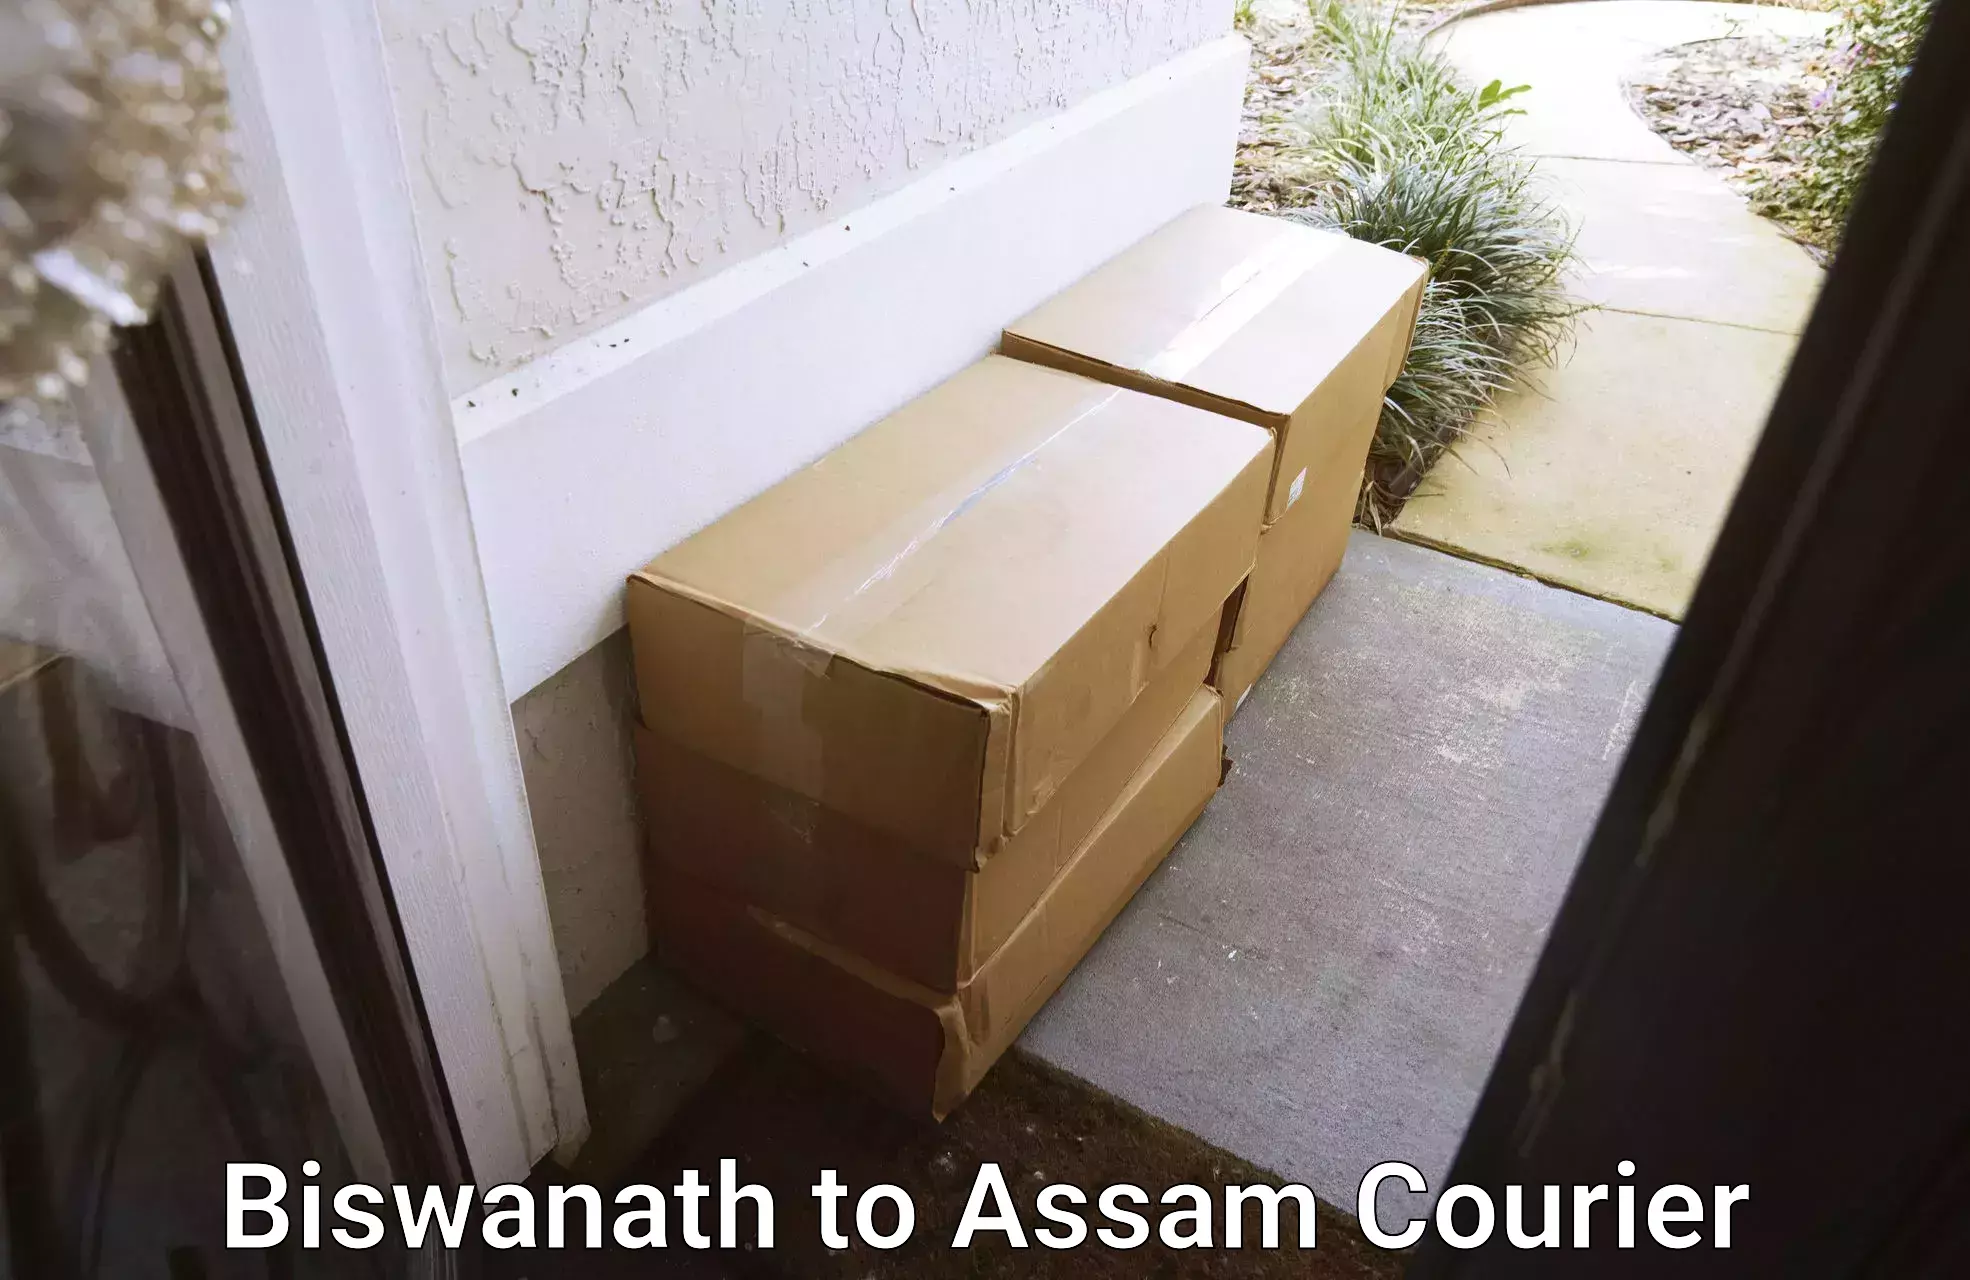 Easy access courier services Biswanath to IIIT Guwahati